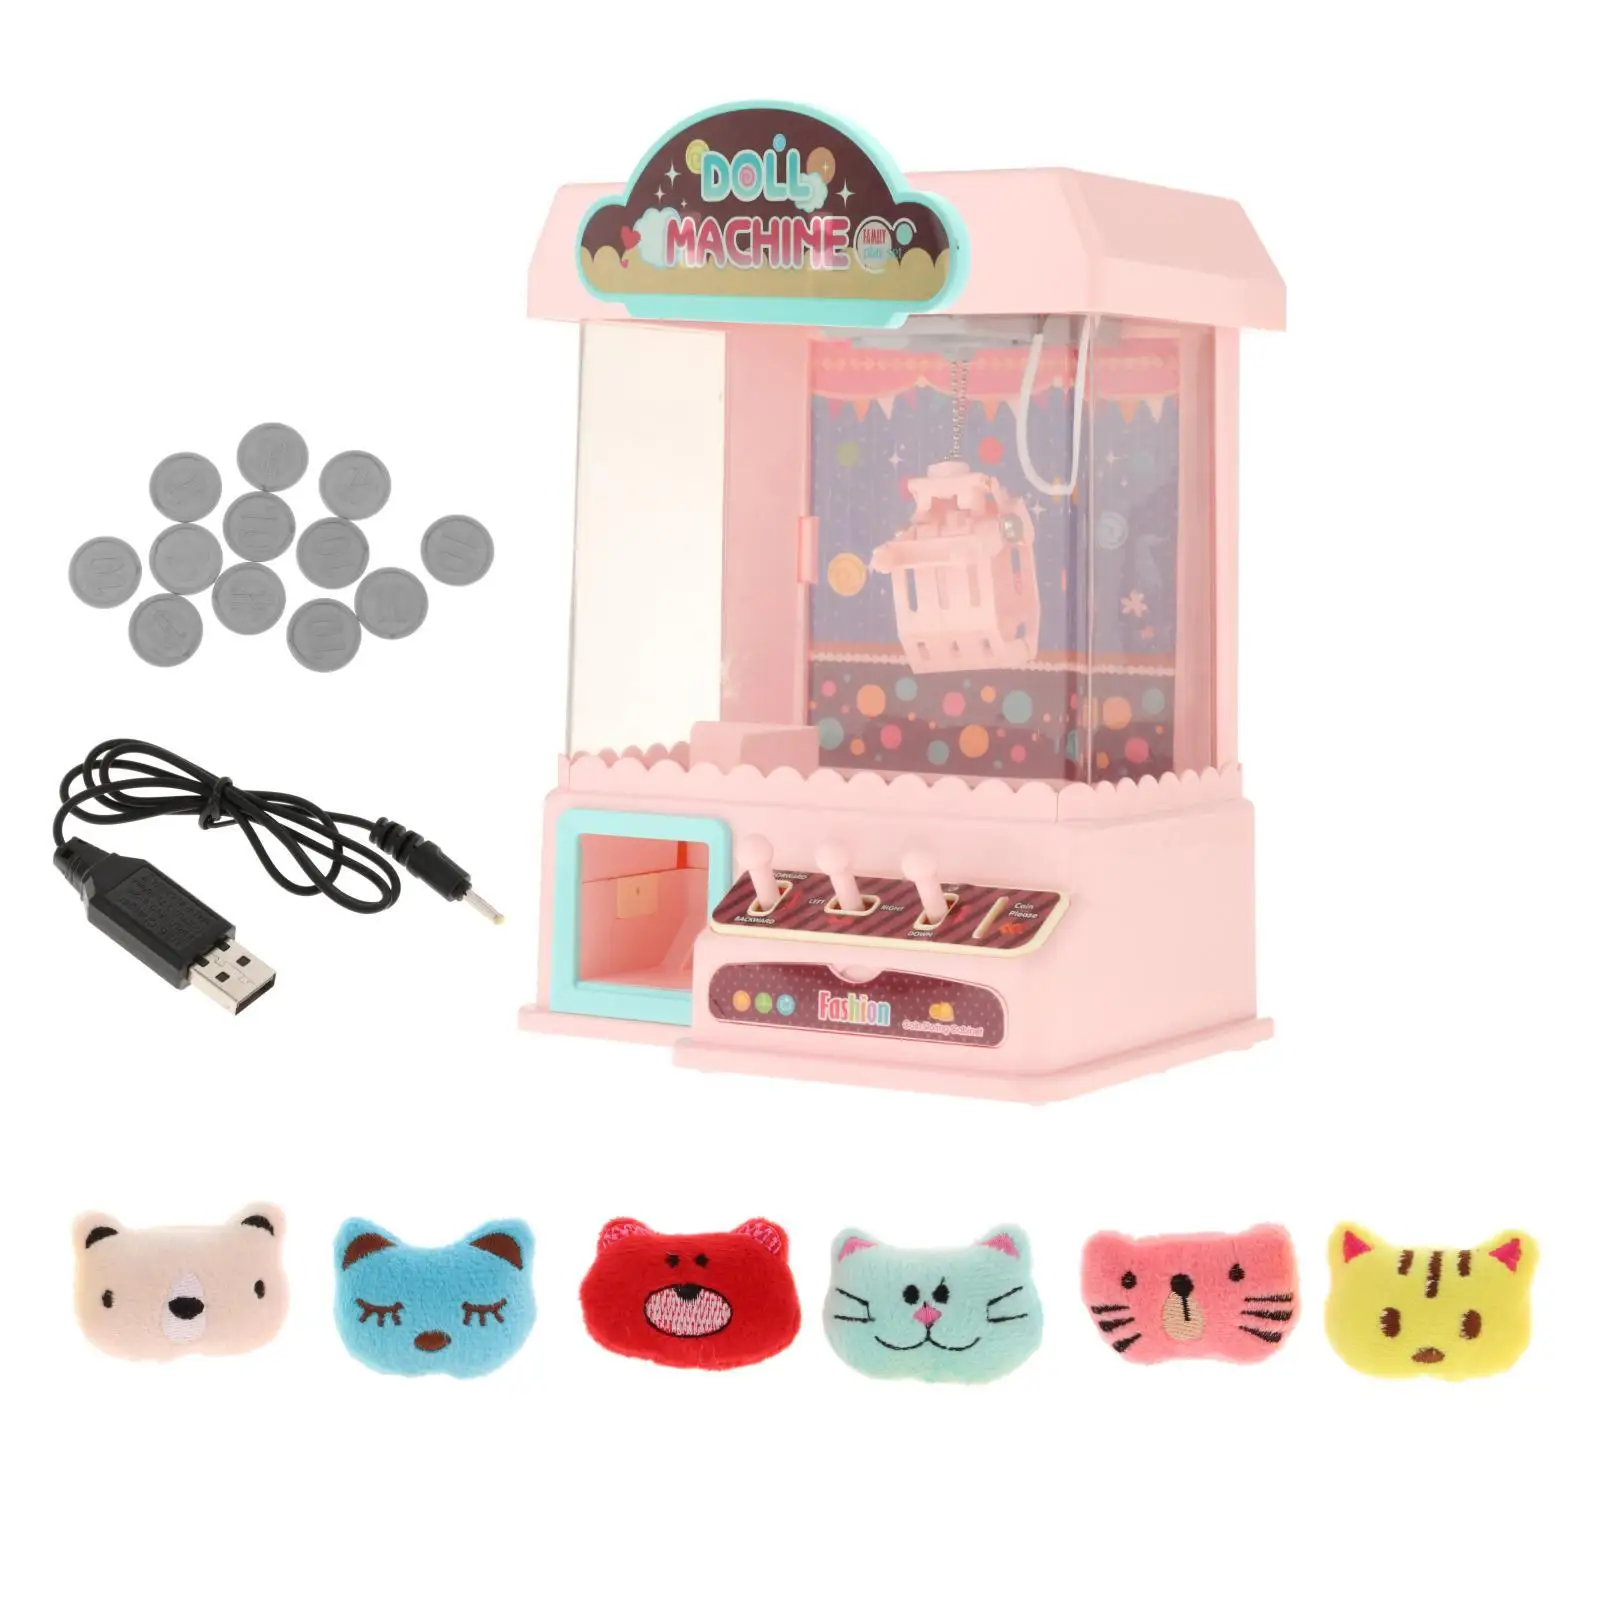 Rechargeable Vending Grabber Machine Mini Arcade Machine for Birthday Gifts